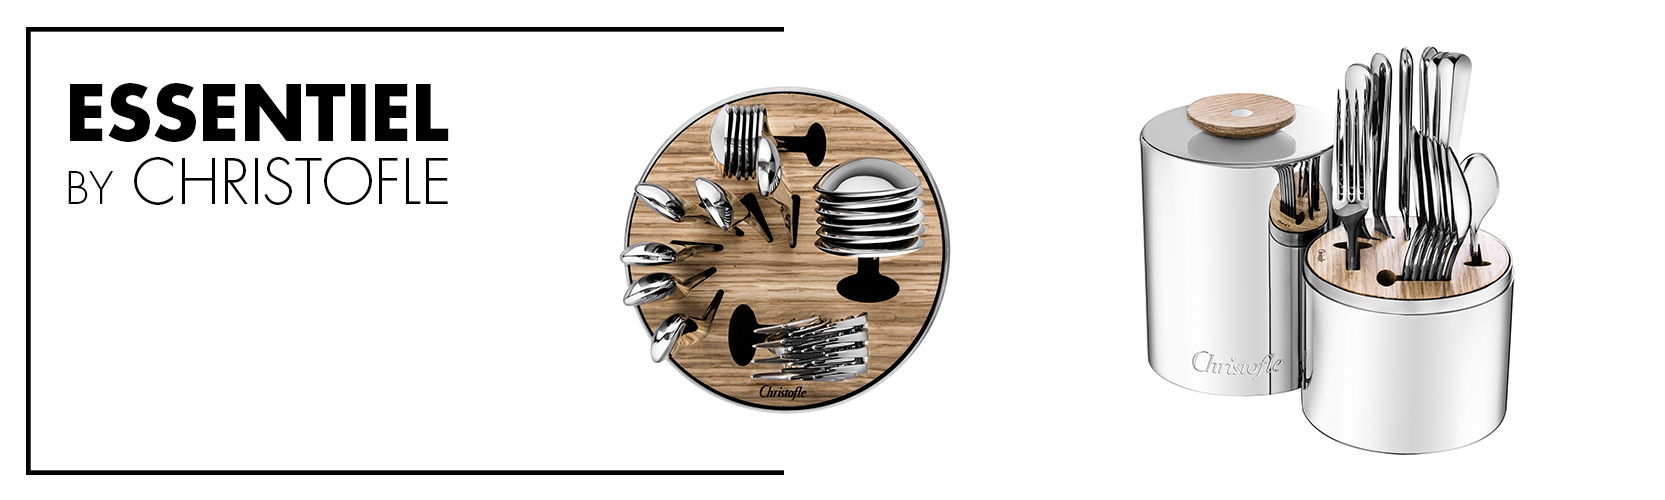 quality silverware and kitchenware